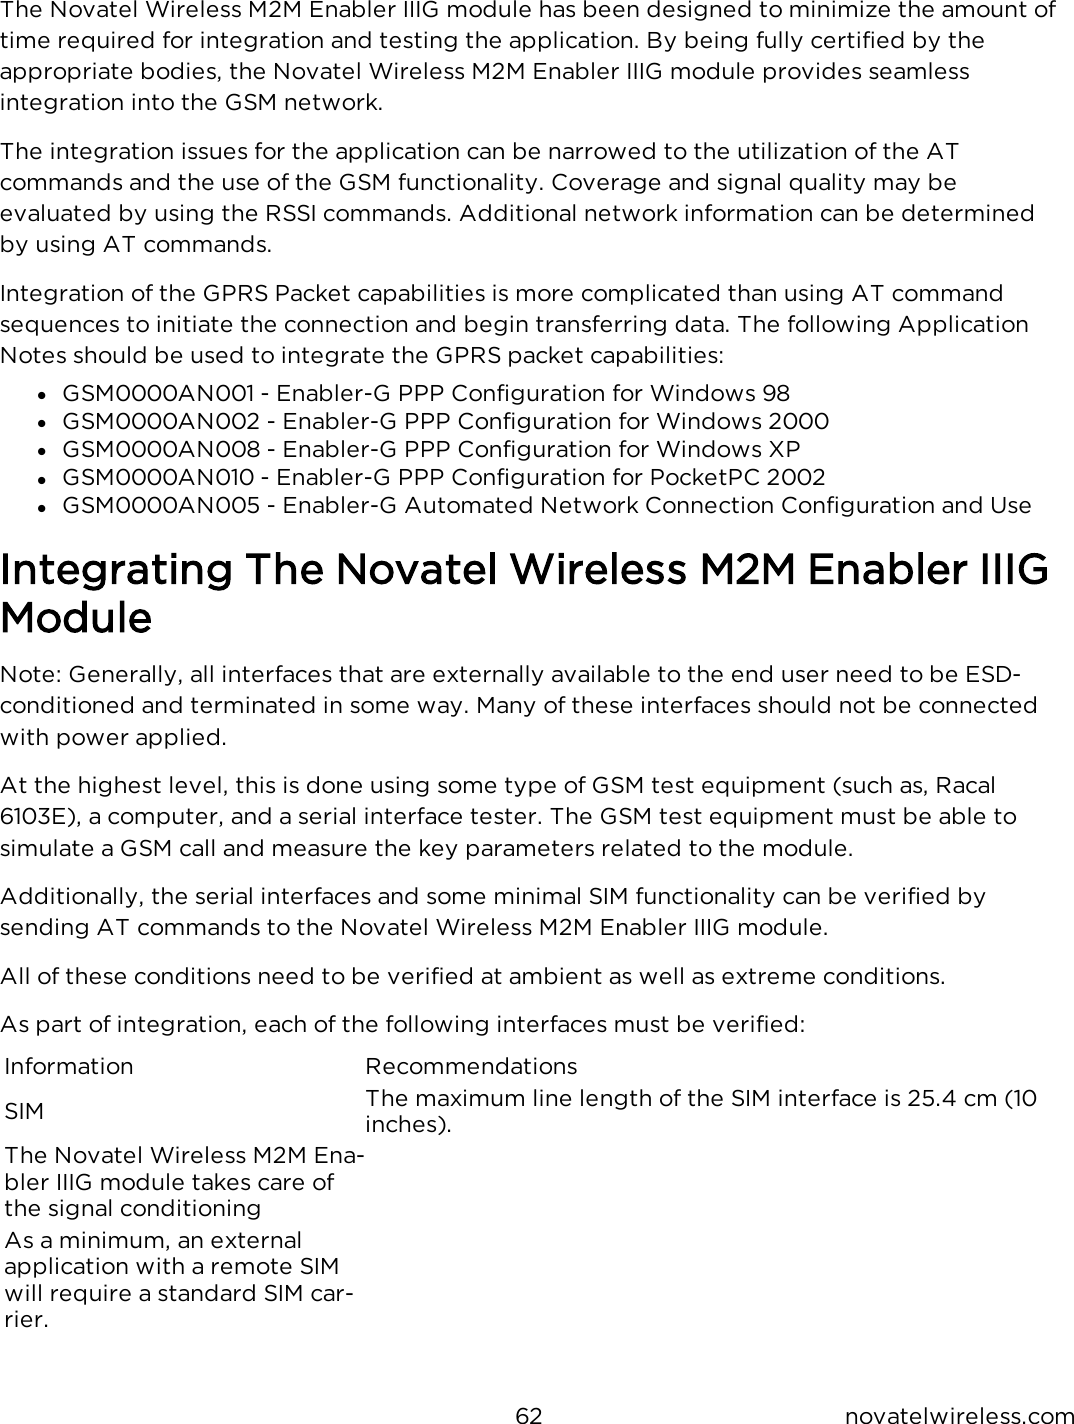 62 novatelwireless.comThe Novatel Wireless M2M Enabler IIIG module has been designed to minimize the amount of time required for integration and testing the application.  By being fully certified by the appropriate bodies, the Novatel Wireless M2M Enabler IIIG module provides seamless integration into the GSM network.The integration issues for the application can be narrowed to the utilization of the AT commands and the use of the GSM functionality.  Coverage and signal quality may be evaluated by using the RSSI commands.  Additional network information can be determined by using AT commands.Integration of the GPRS Packet capabilities is more complicated than using AT command sequences to initiate the connection and begin transferring data.  The following Application Notes should be used to integrate the GPRS packet capabilities:l  GSM0000AN001 - Enabler-G PPP Configuration for Windows 98l  GSM0000AN002 - Enabler-G PPP Configuration for Windows 2000l  GSM0000AN008 - Enabler-G PPP Configuration for Windows XPl  GSM0000AN010 - Enabler-G PPP Configuration for PocketPC 2002l  GSM0000AN005 - Enabler-G Automated Network Connection Configuration and UseIntegrating The Novatel Wireless M2M Enabler IIIG ModuleNote: Generally, all interfaces that are externally available to the end user need to be ESD-conditioned and terminated in some way.  Many of these interfaces should not be connected with power applied.At the highest level, this is done using some type of GSM test equipment (such as, Racal 6103E), a computer, and a serial interface tester.  The GSM test equipment must be able to simulate a GSM call and measure the key parameters related to the module.Additionally, the serial interfaces and some minimal SIM functionality can be verified by sending AT commands to the Novatel Wireless M2M Enabler IIIG module.All of these conditions need to be verified at ambient as well as extreme conditions.As part of integration, each of the following interfaces must be verified:Information RecommendationsSIM The maximum line length of the SIM interface is 25.4 cm (10 inches).The Novatel Wireless M2M Ena-bler IIIG module takes care of the signal conditioningAs a minimum, an external application with a remote SIM will require a standard SIM car-rier.